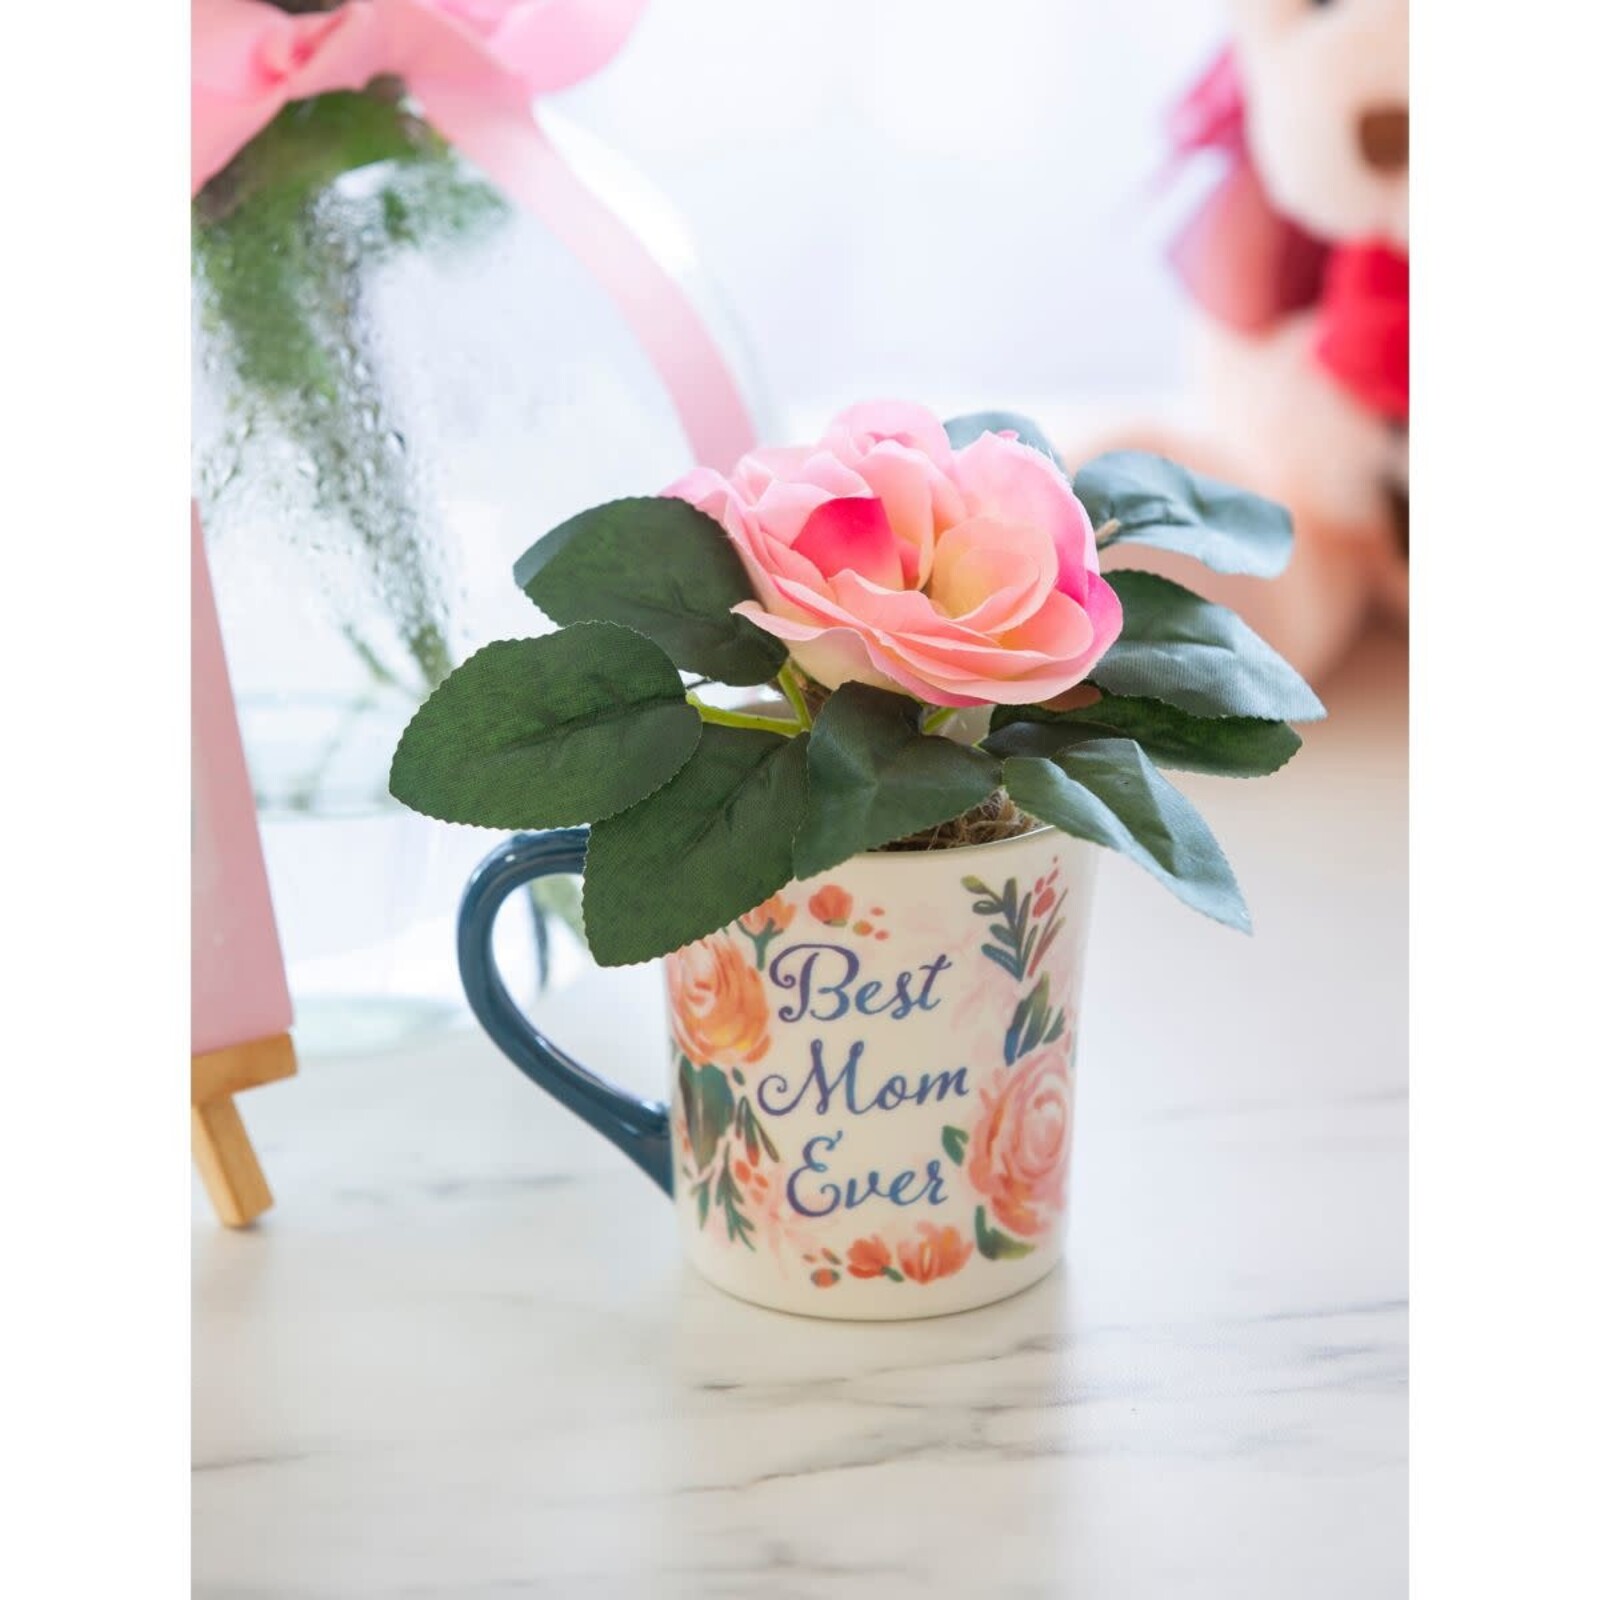 Evergreen Enterprises Coffee Cup and Floral Gift Set, Best Mom Ever P3758005 loading=